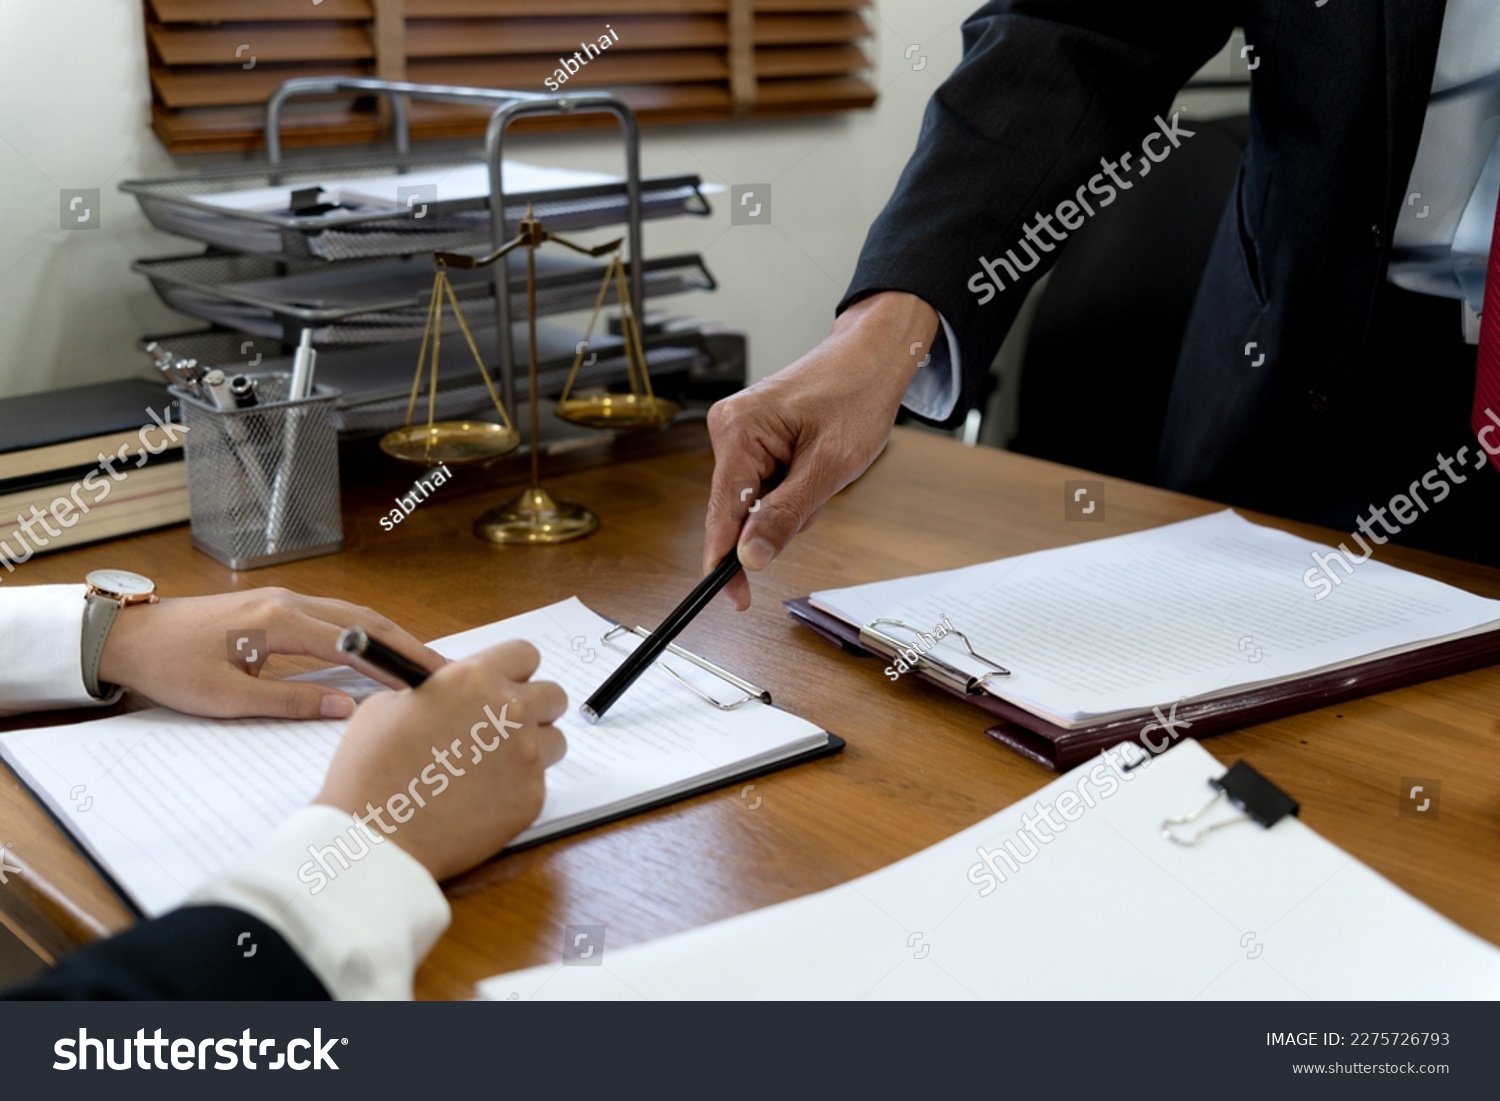 Law firms discussing with pen pointing at documents drafting or amending contracts in law firm office
 #2275726793